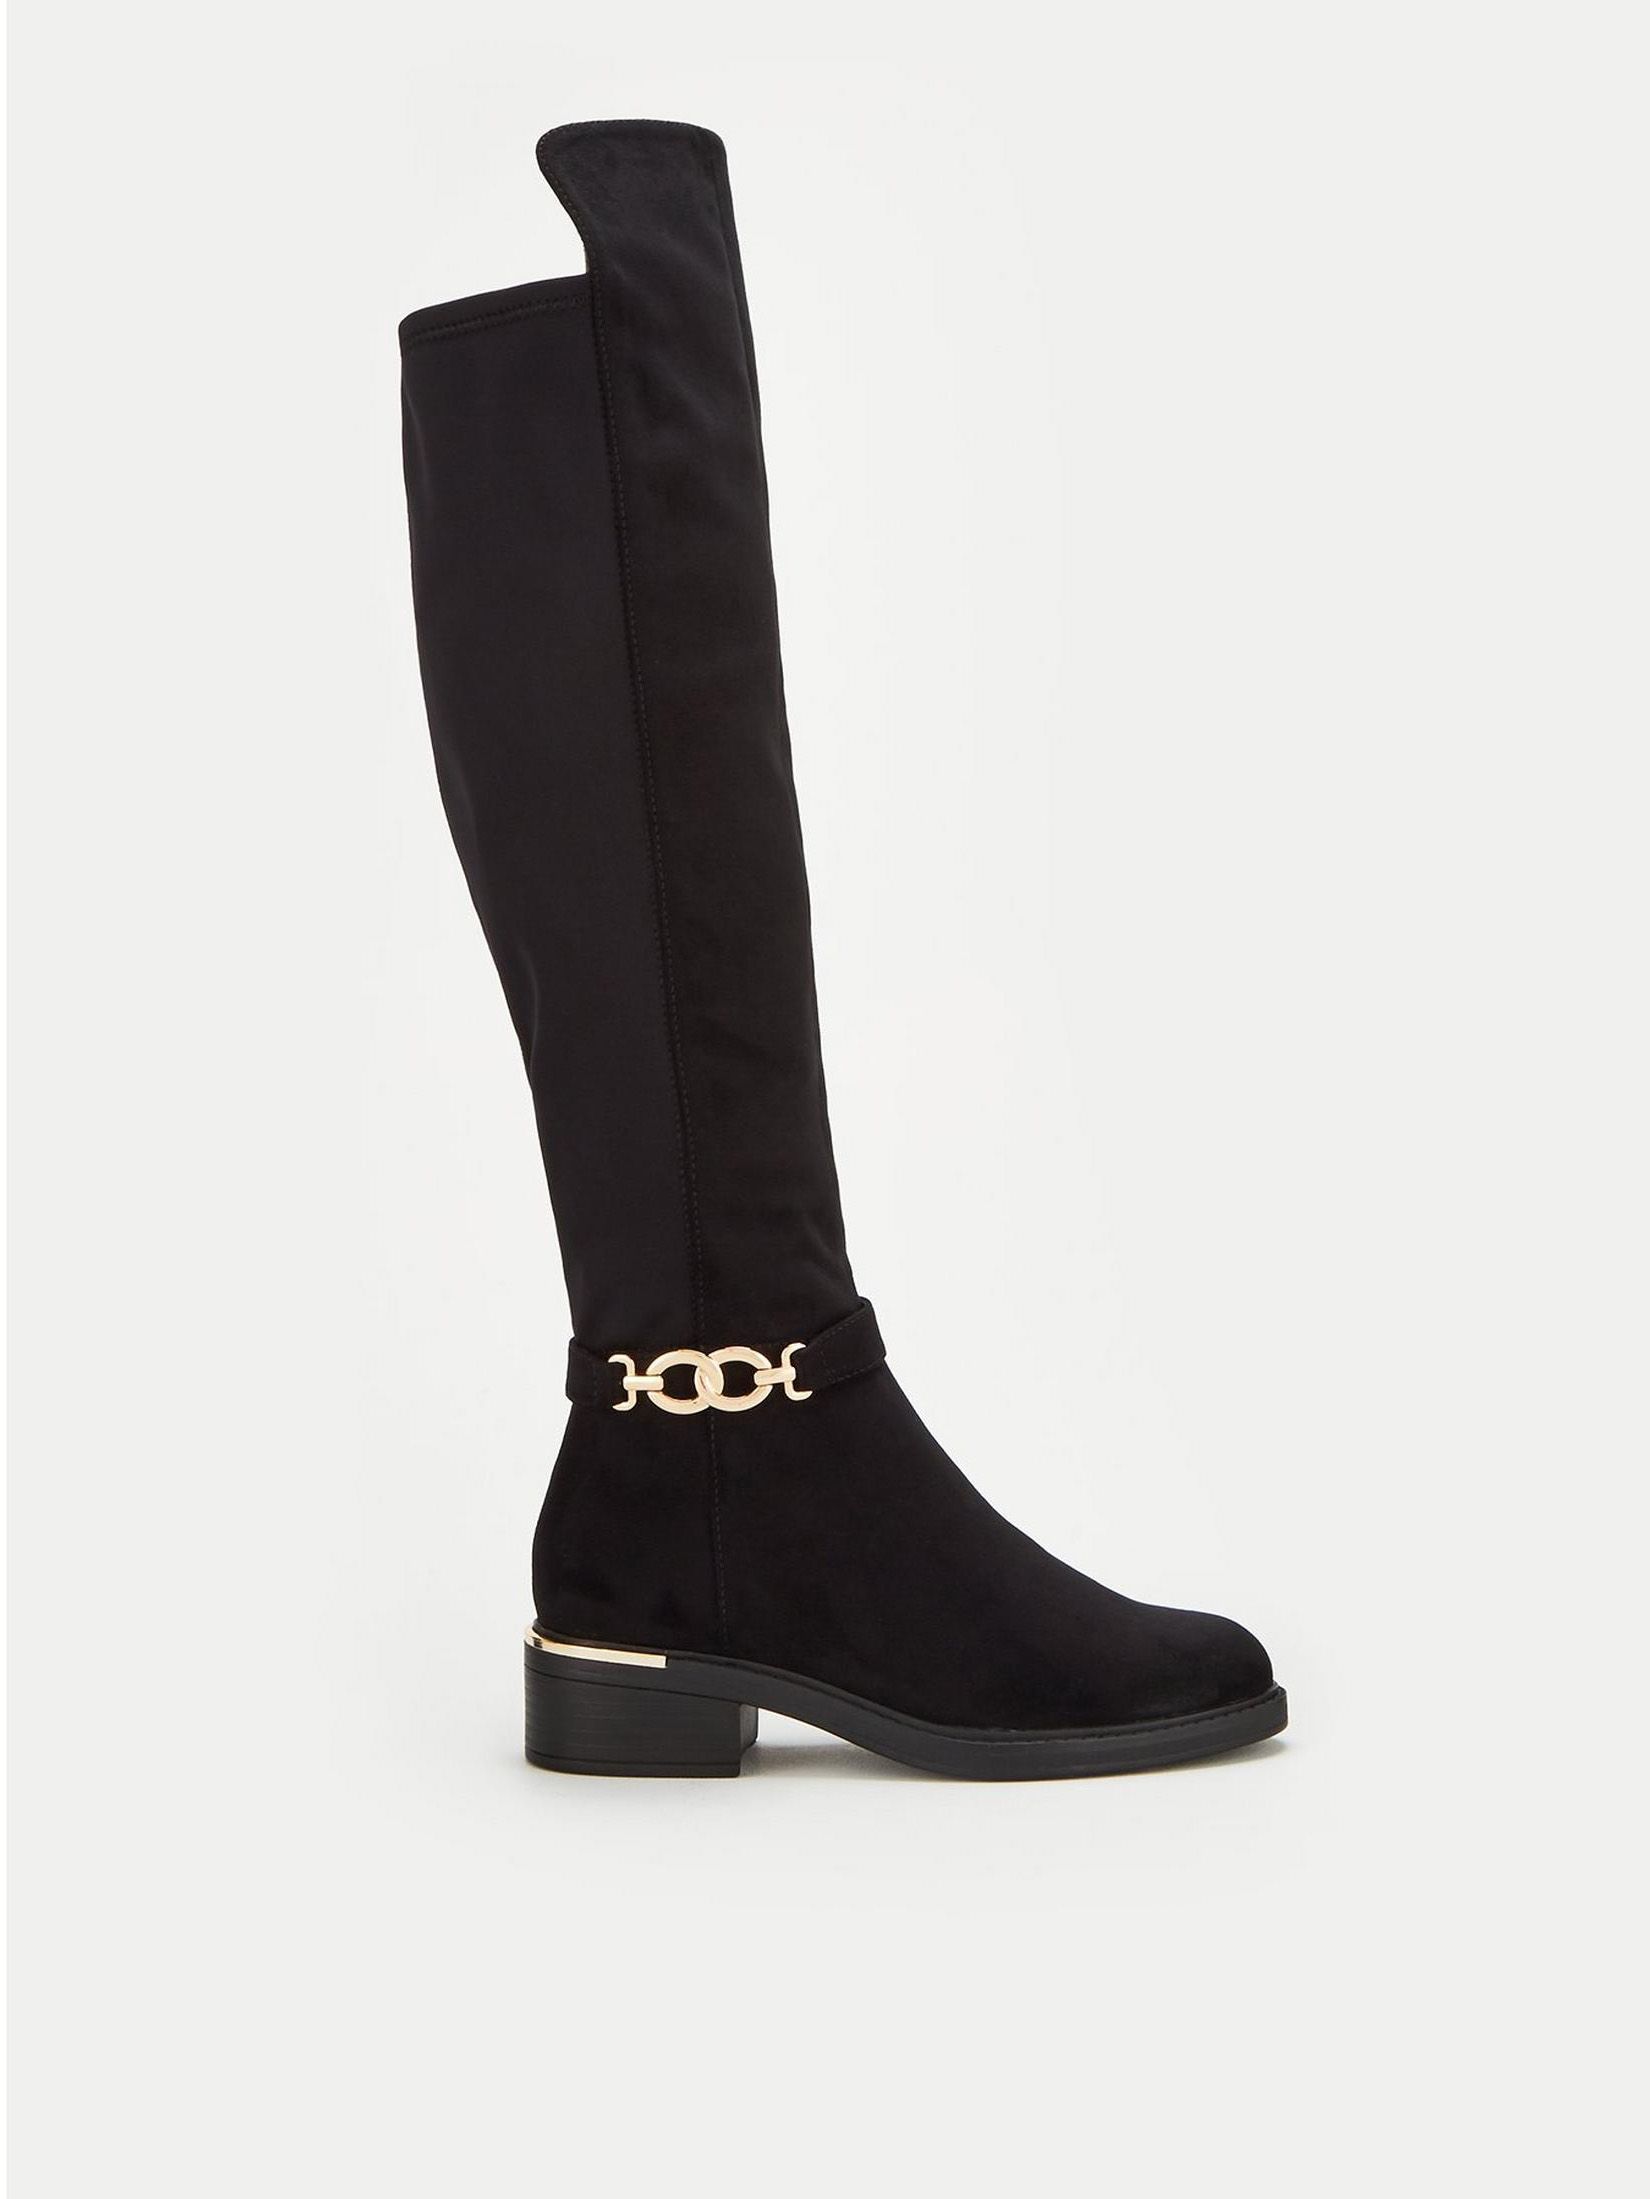 Best wide calf boots and wide fit boots 